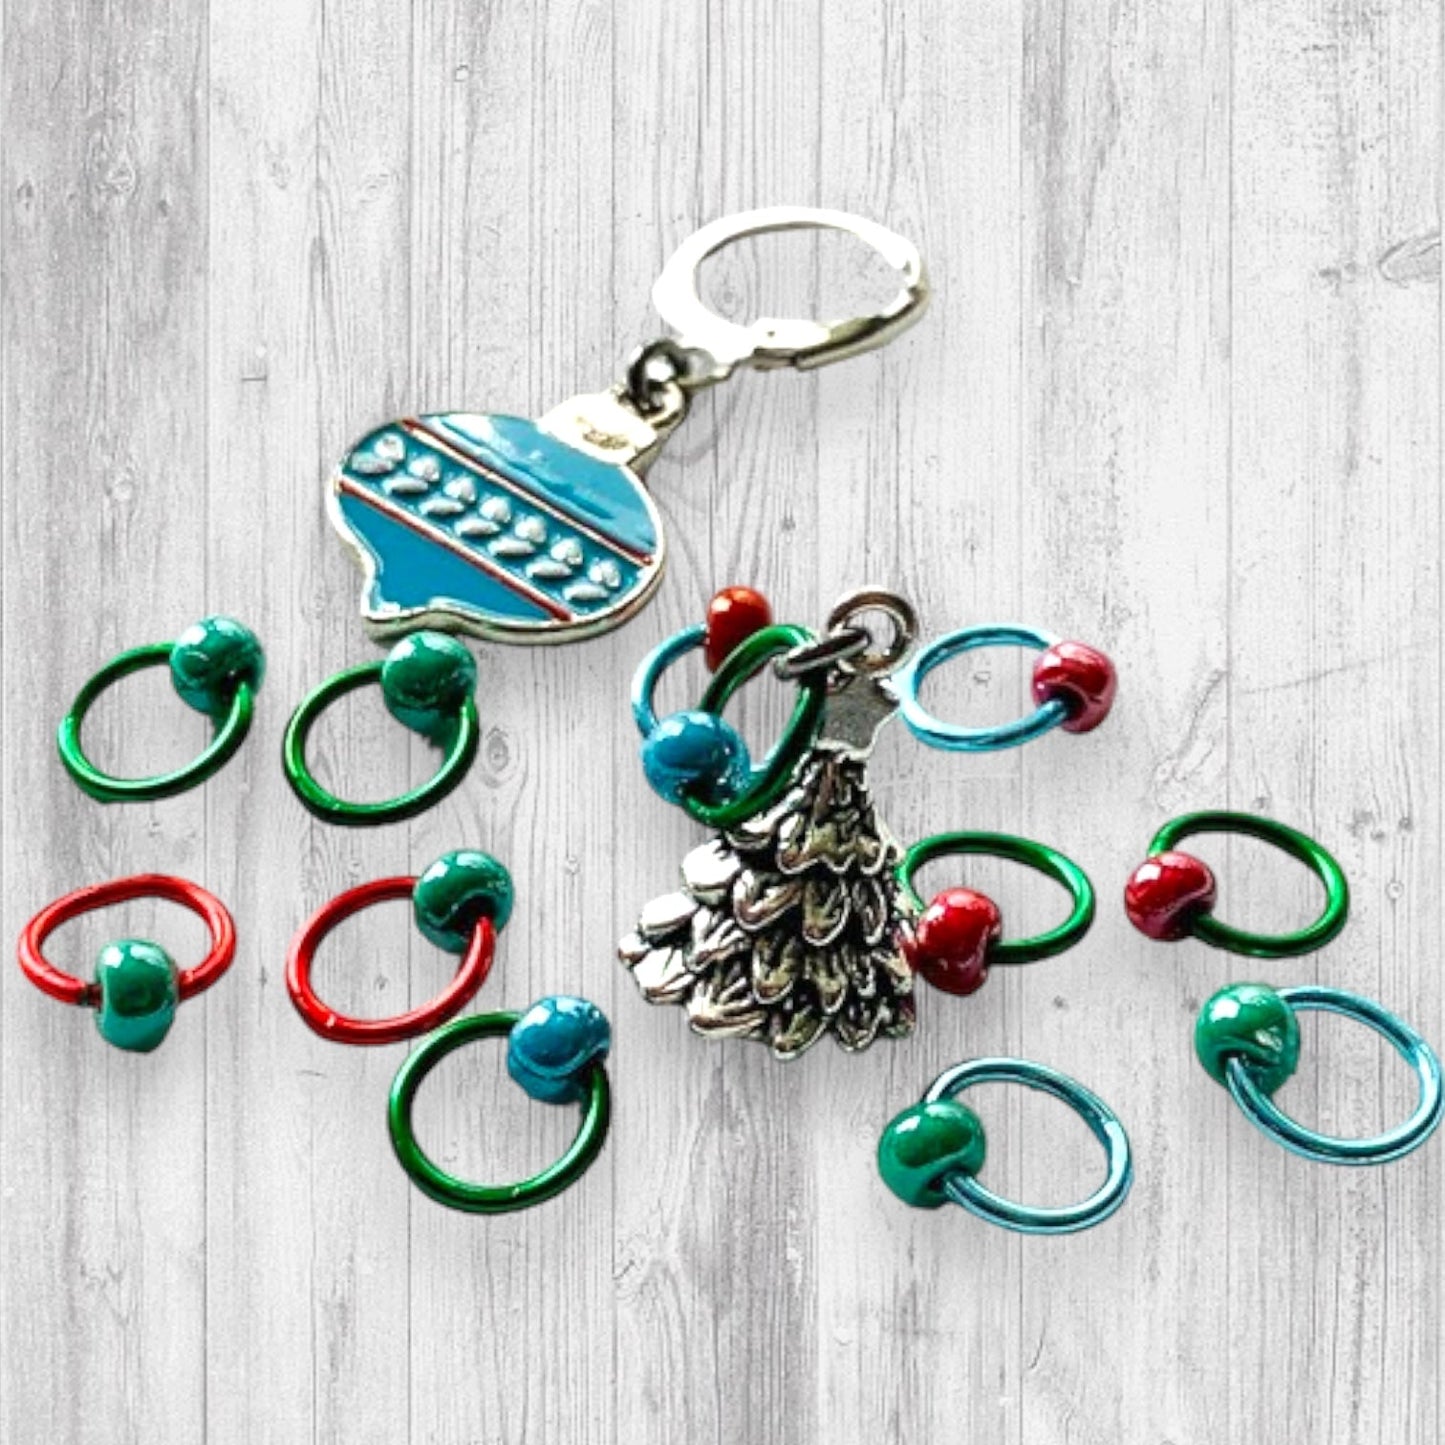 Christmas Ornament with 3D Tree Progress and Stitch Markers - AdoreKnit